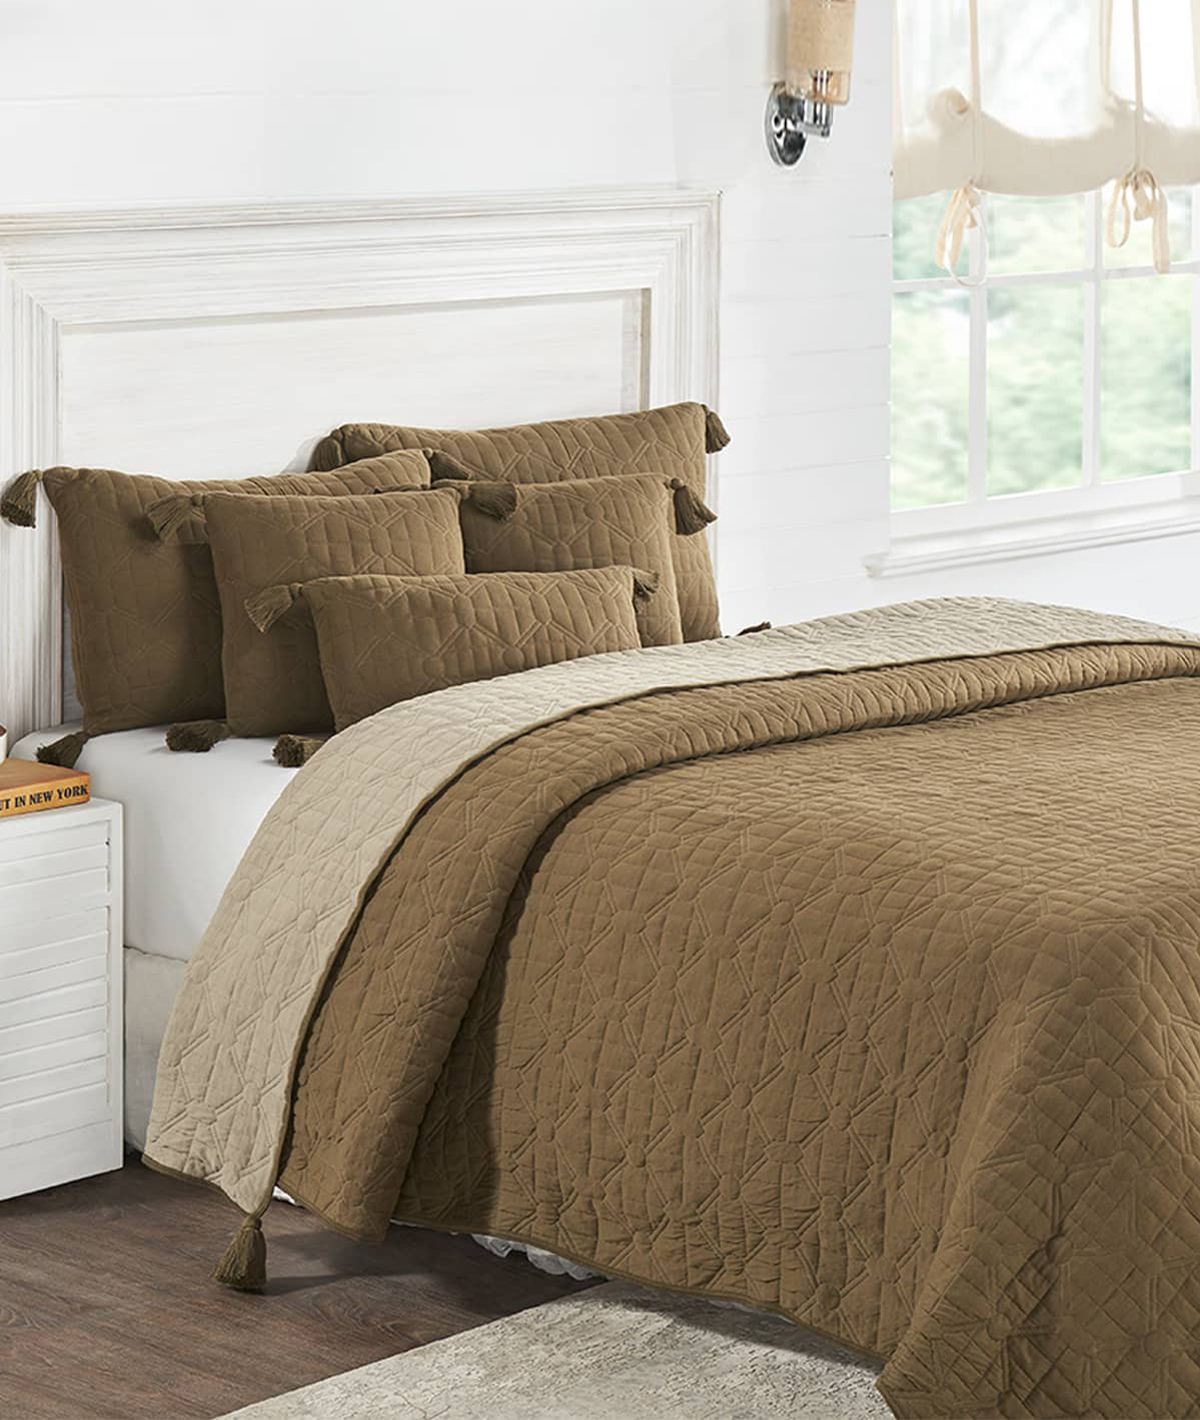 King size bedcover set of 6